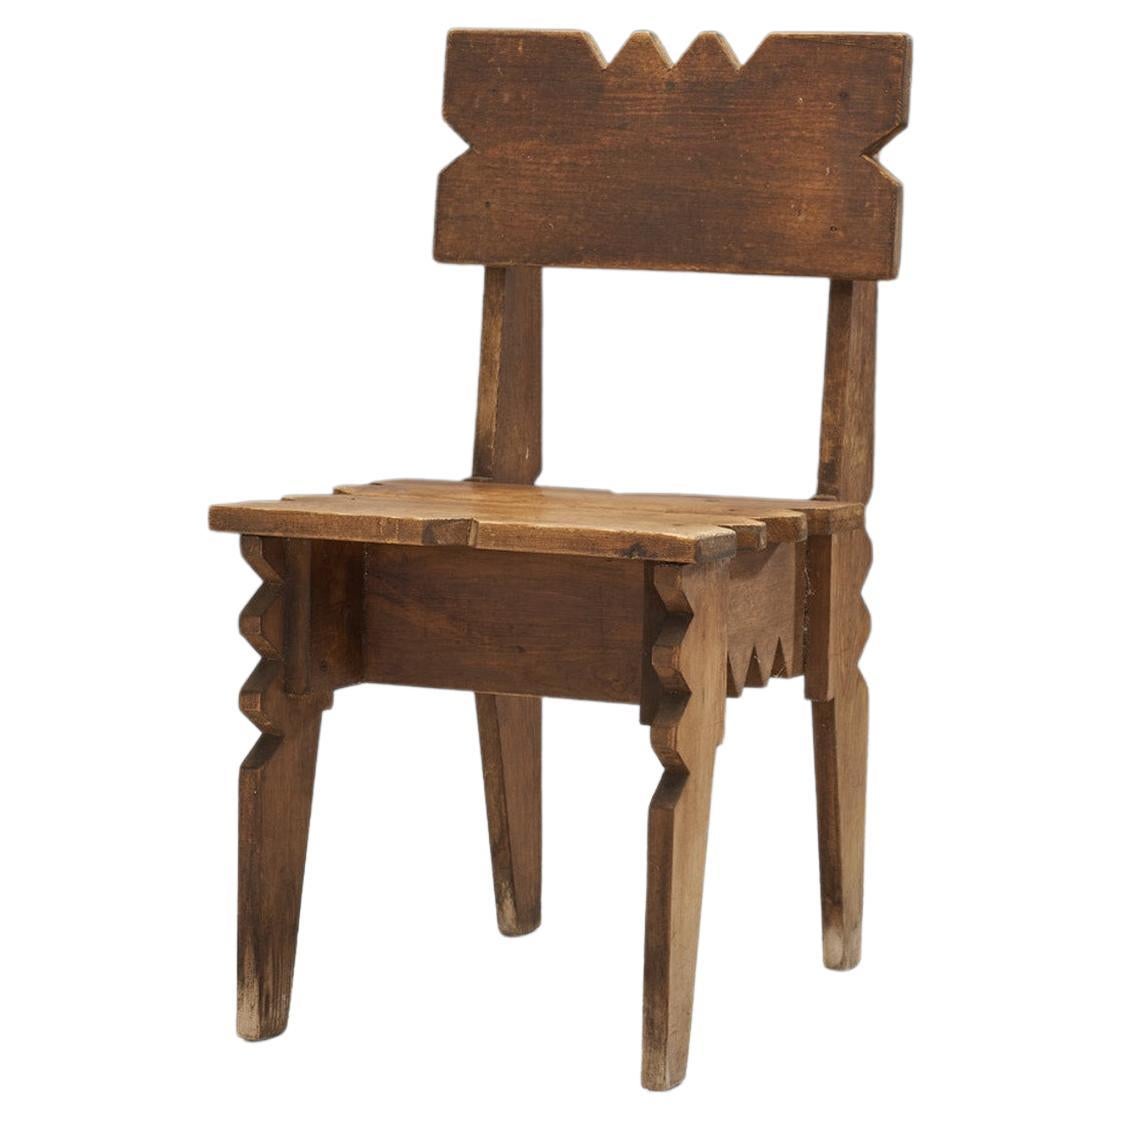 Carved Natural Wood Chair from François Catroux Collection, France 20th Century